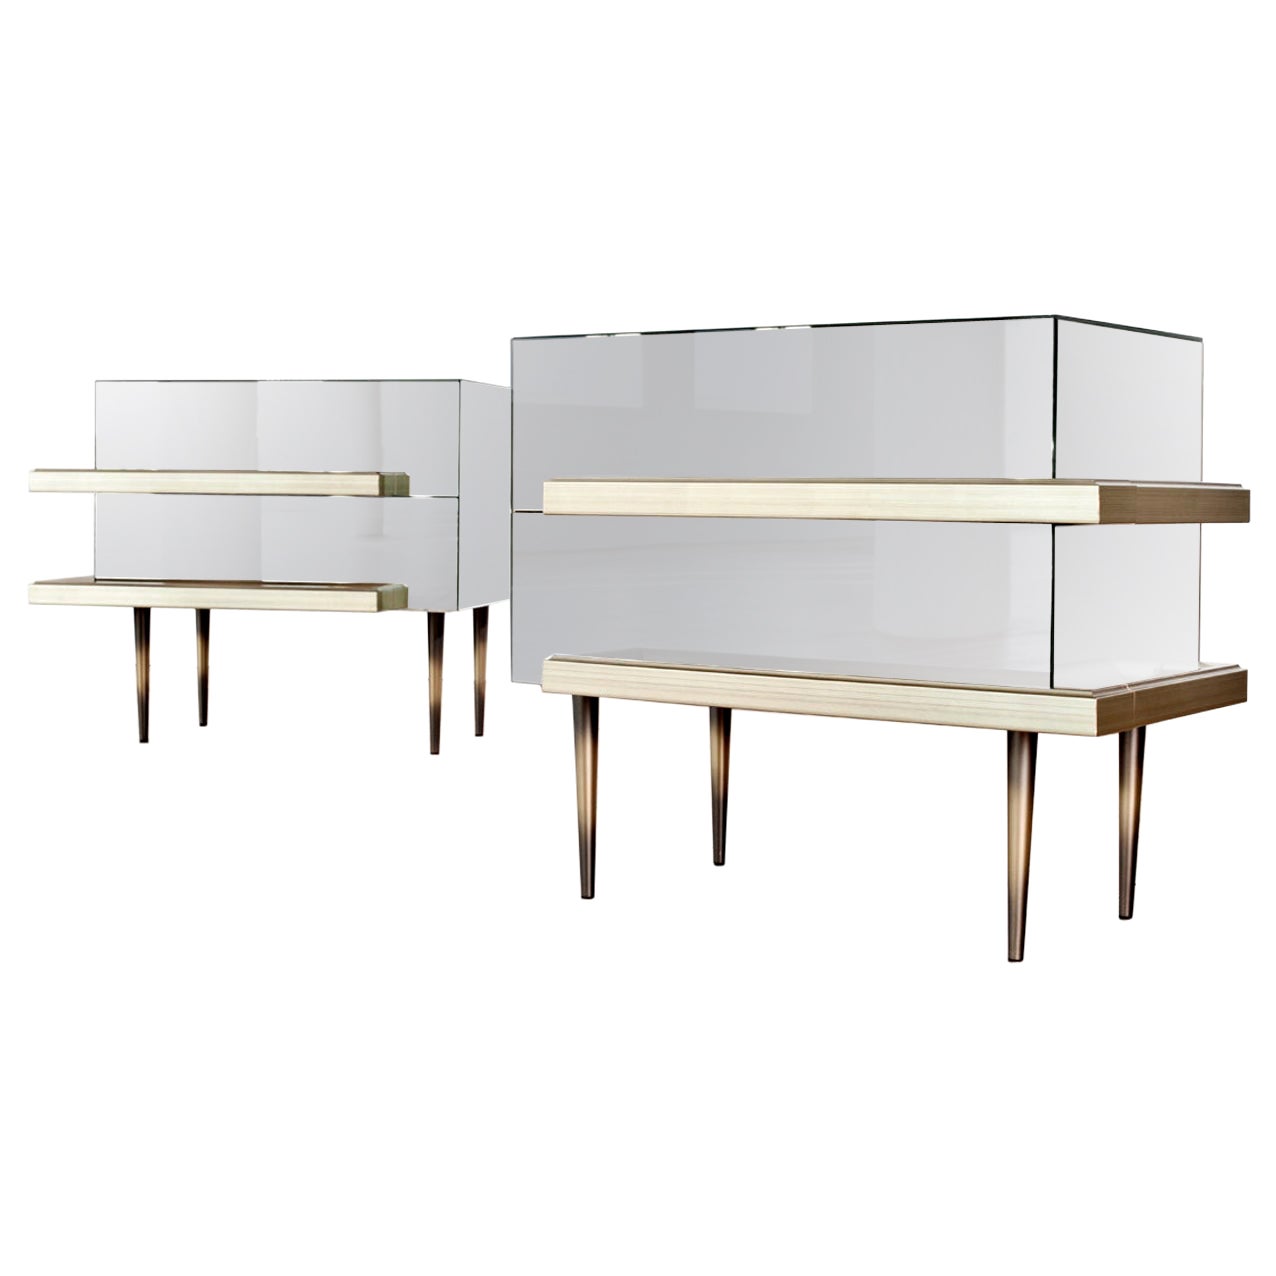 Illusion Set of 2 Nightstands Mirror by Luis Pons For Sale